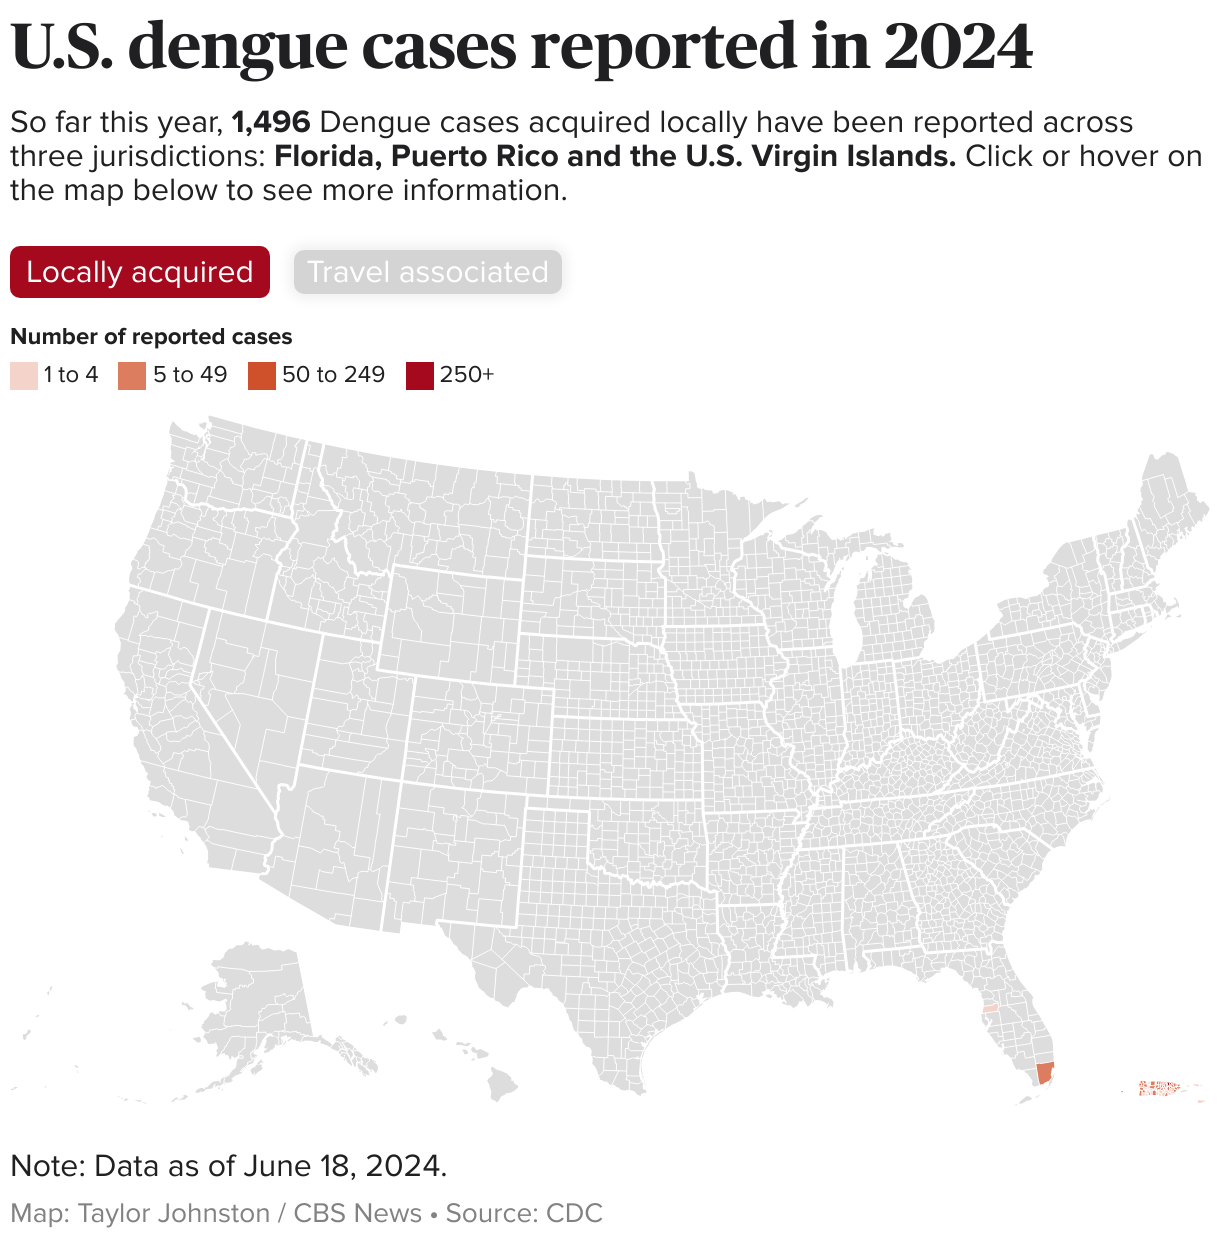 U.S. map showing where Dengue cases were locally acquired so far in 2024.